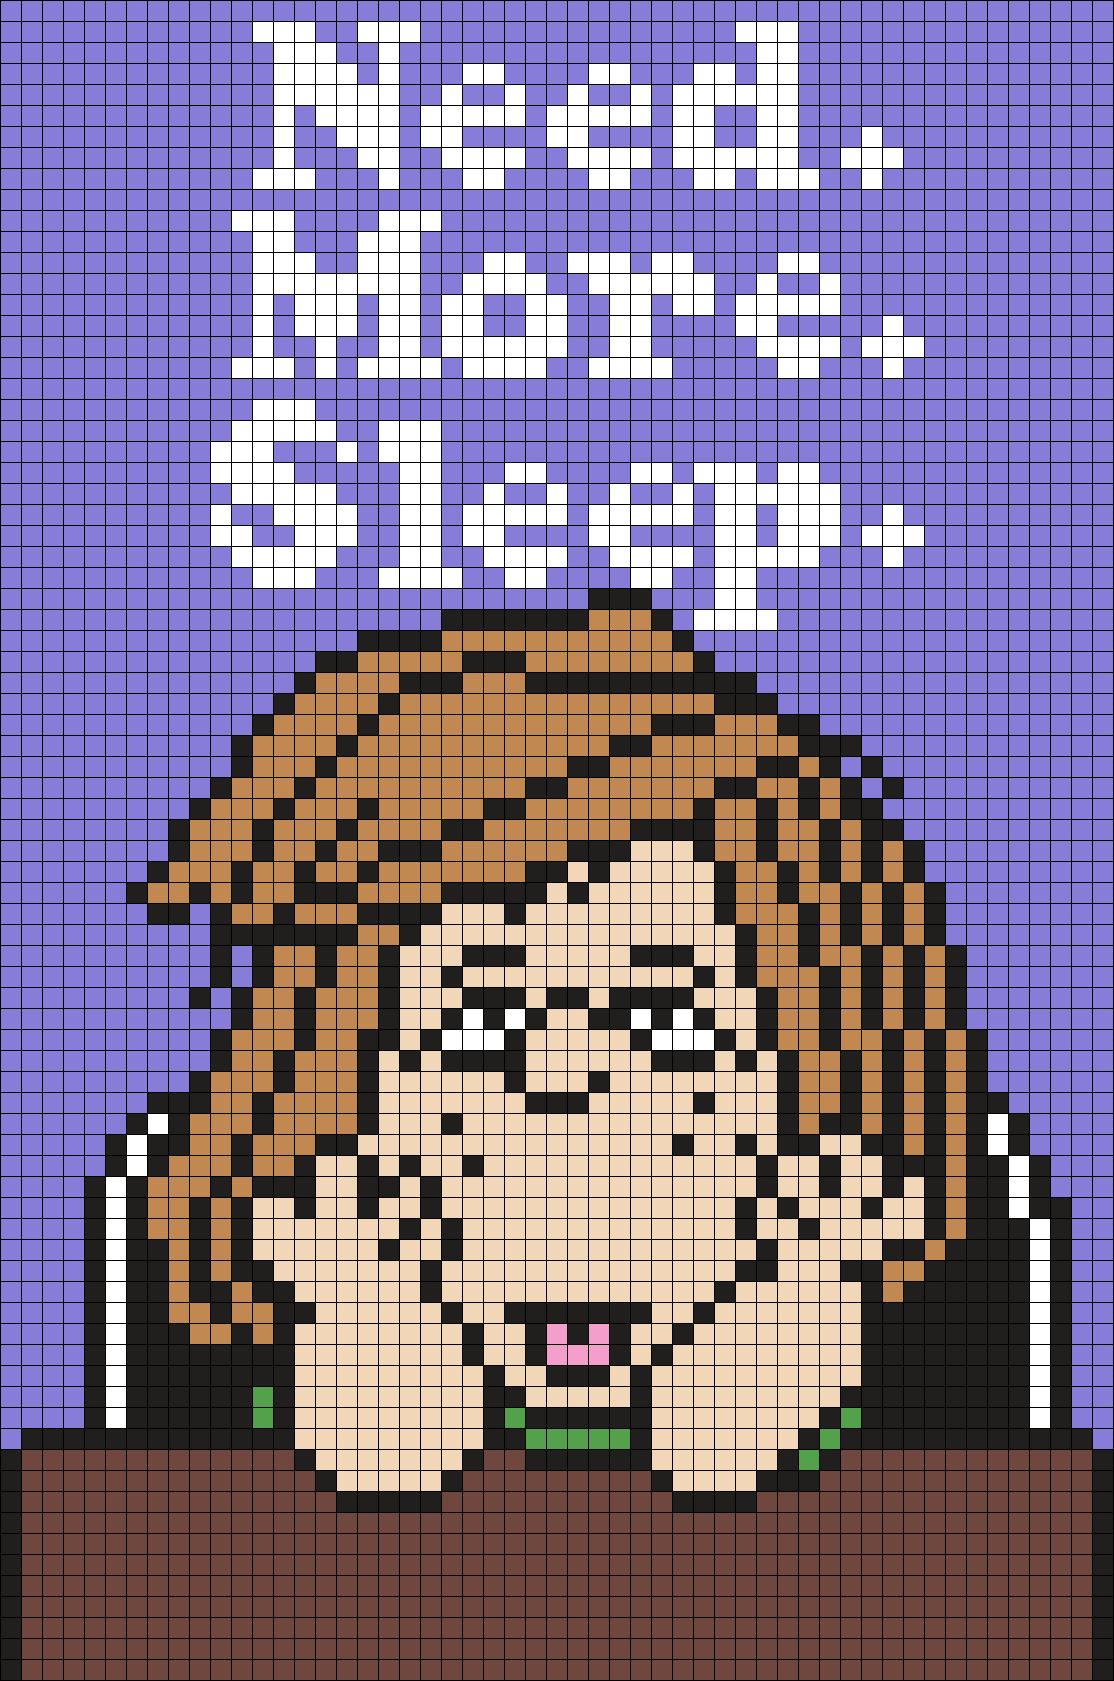 Peppermint Patty From Peanuts Need More Sleep Poster